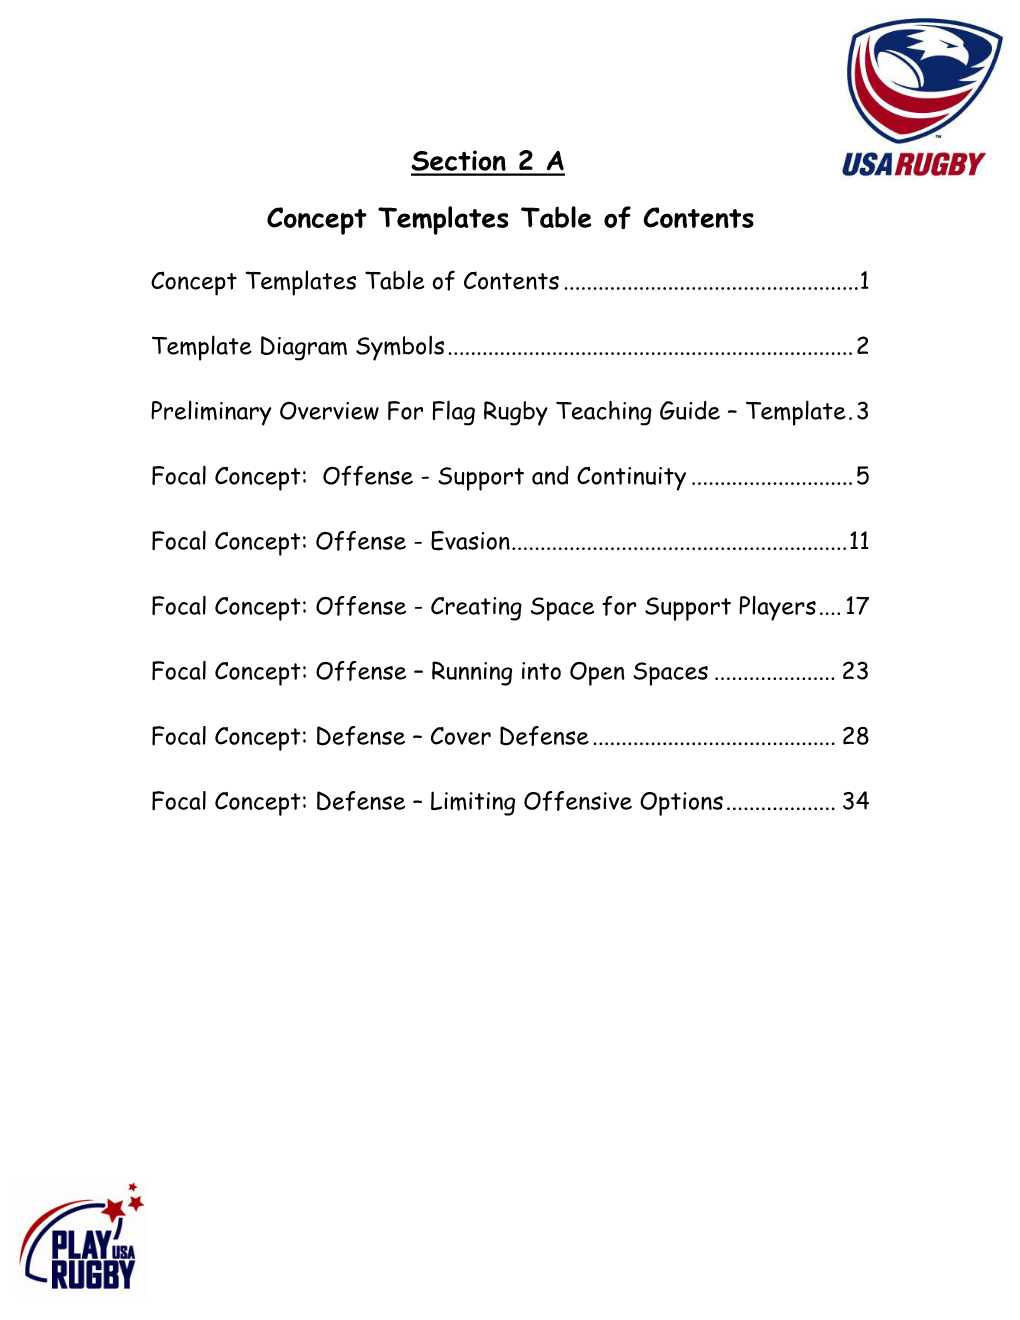 Flag Rugby Curriculum to Their Students